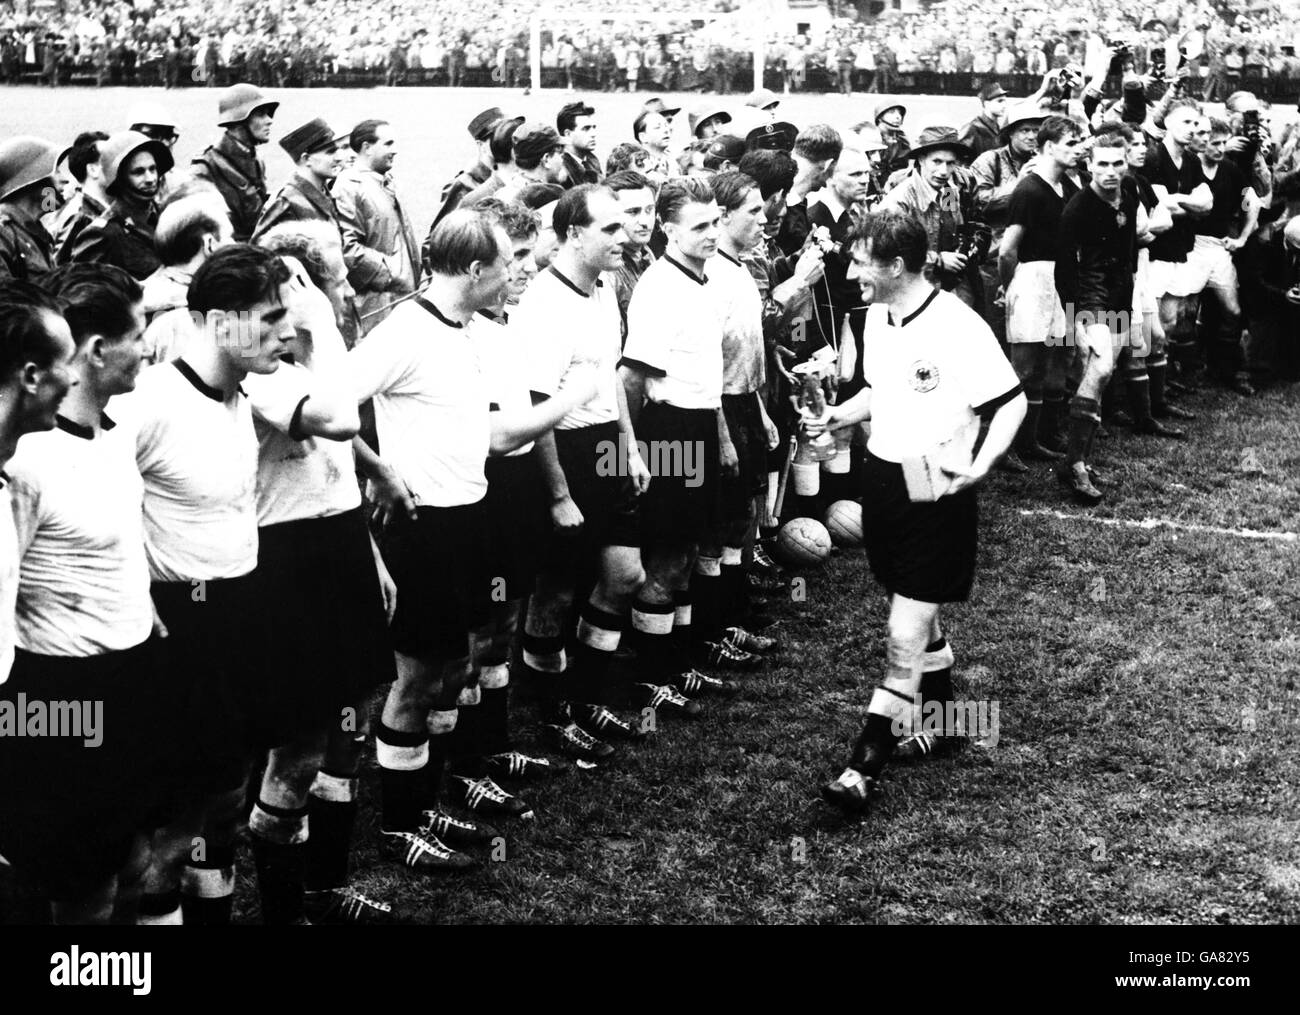 (L-R) West Germany's Horst Eckel, Helmut Rahn, Ottmar Walter, Werner Liebrich, Josef Posipal, Hans Schafer, Werner Kohlmeyer, Karl Mai and Max Morlock watch as grinning captain Fritz Walter returns to the line after collecting the Jules Rimet Trophy following his team's 3-2 victory over Hungary, who look on disappointedly Stock Photo